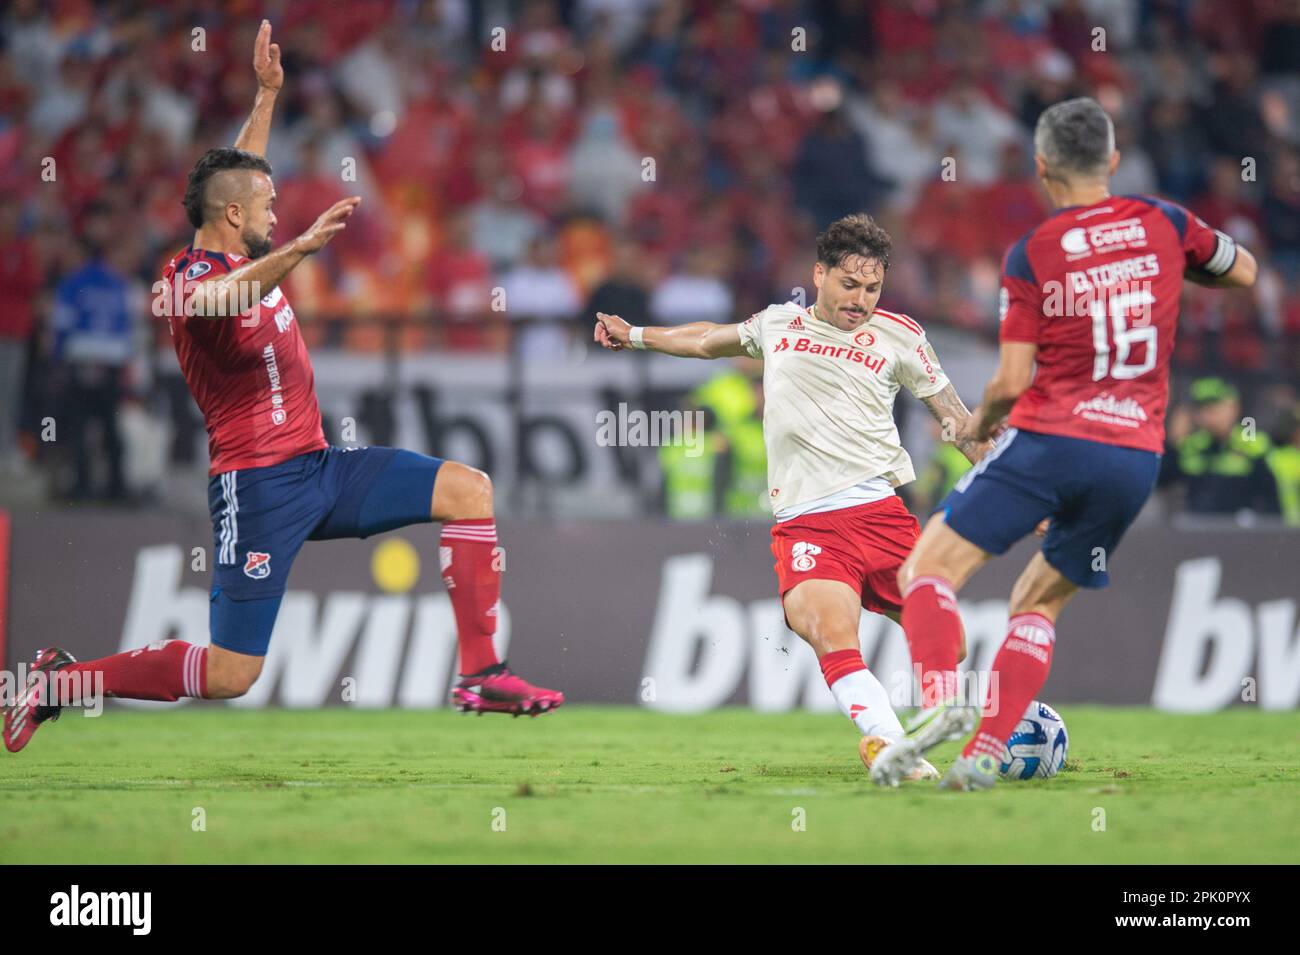 Medellin, Colombia, 04th Apr, 2023. Maurício of Internacional, during the match between Independiente Medellín and Internacional for the 1st round of Group B of Libertadores 2023, at Atanasio Girardot, in Medellin, Colombia on April 04. Photo: Max Peixoto/DiaEsportivo/DiaEsportivo/Alamy Live News Stock Photo